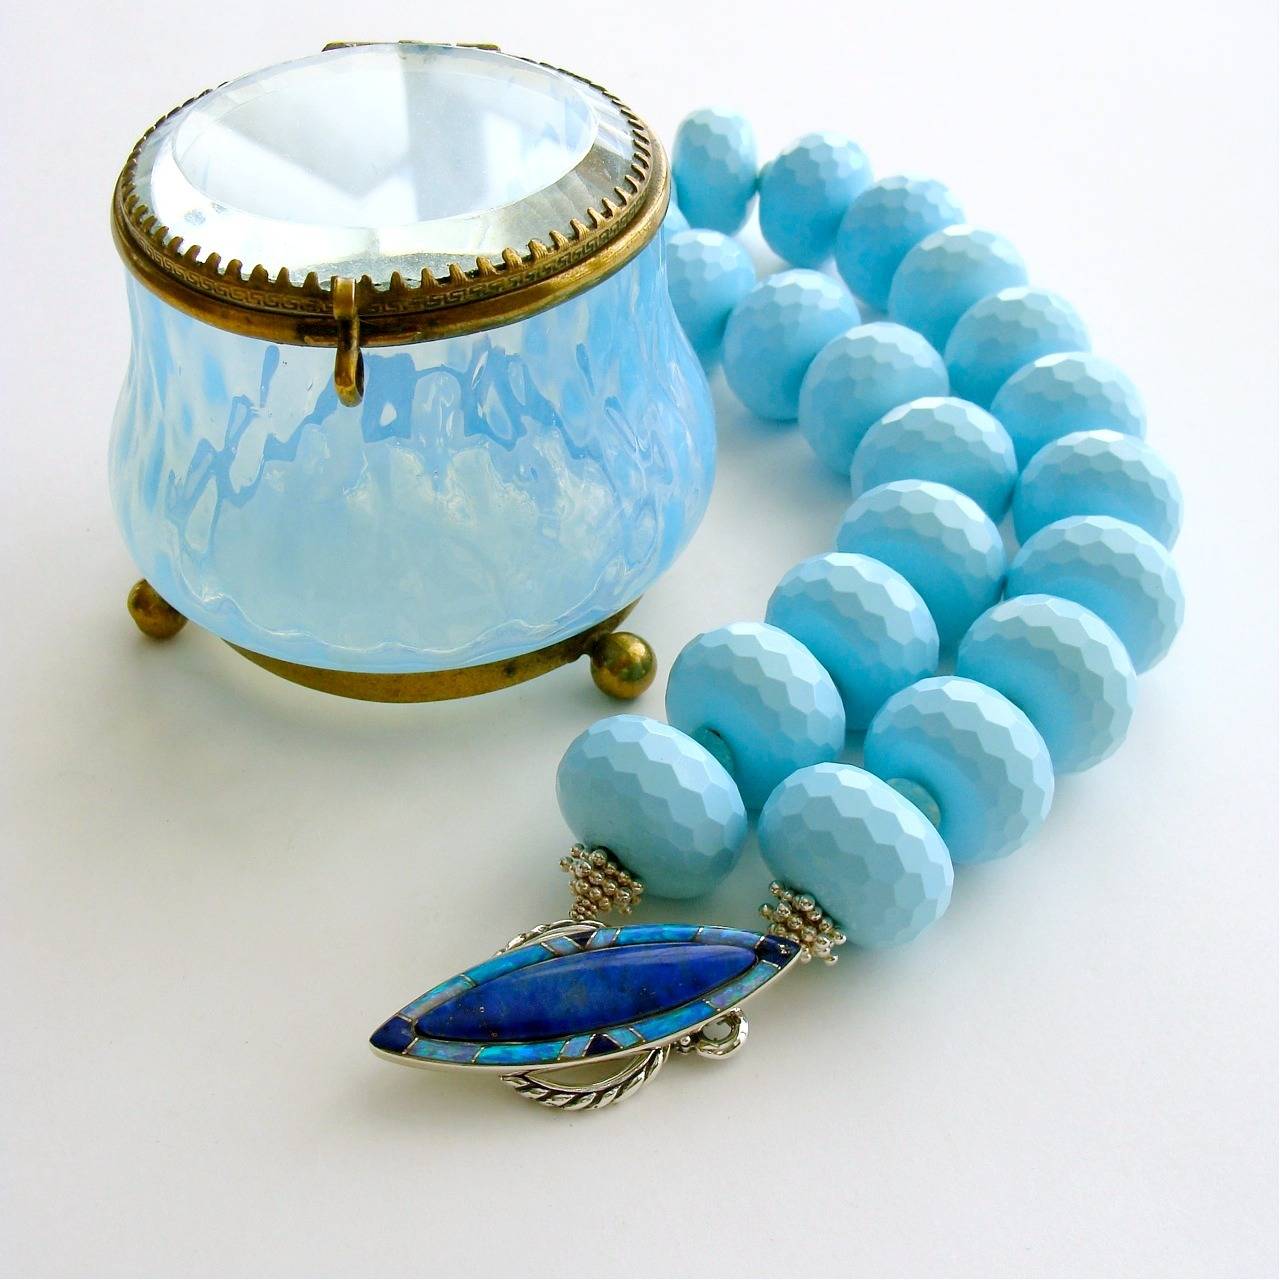 Highly-coveted honeycomb cut jumbo reconstituted turquoise rondelles have been separated by German cut Russian amazonite and are further enhanced with a luxurious marquise-shaped inlaid toggle clasp of lapis and opal.  The gorgeous sterling silver